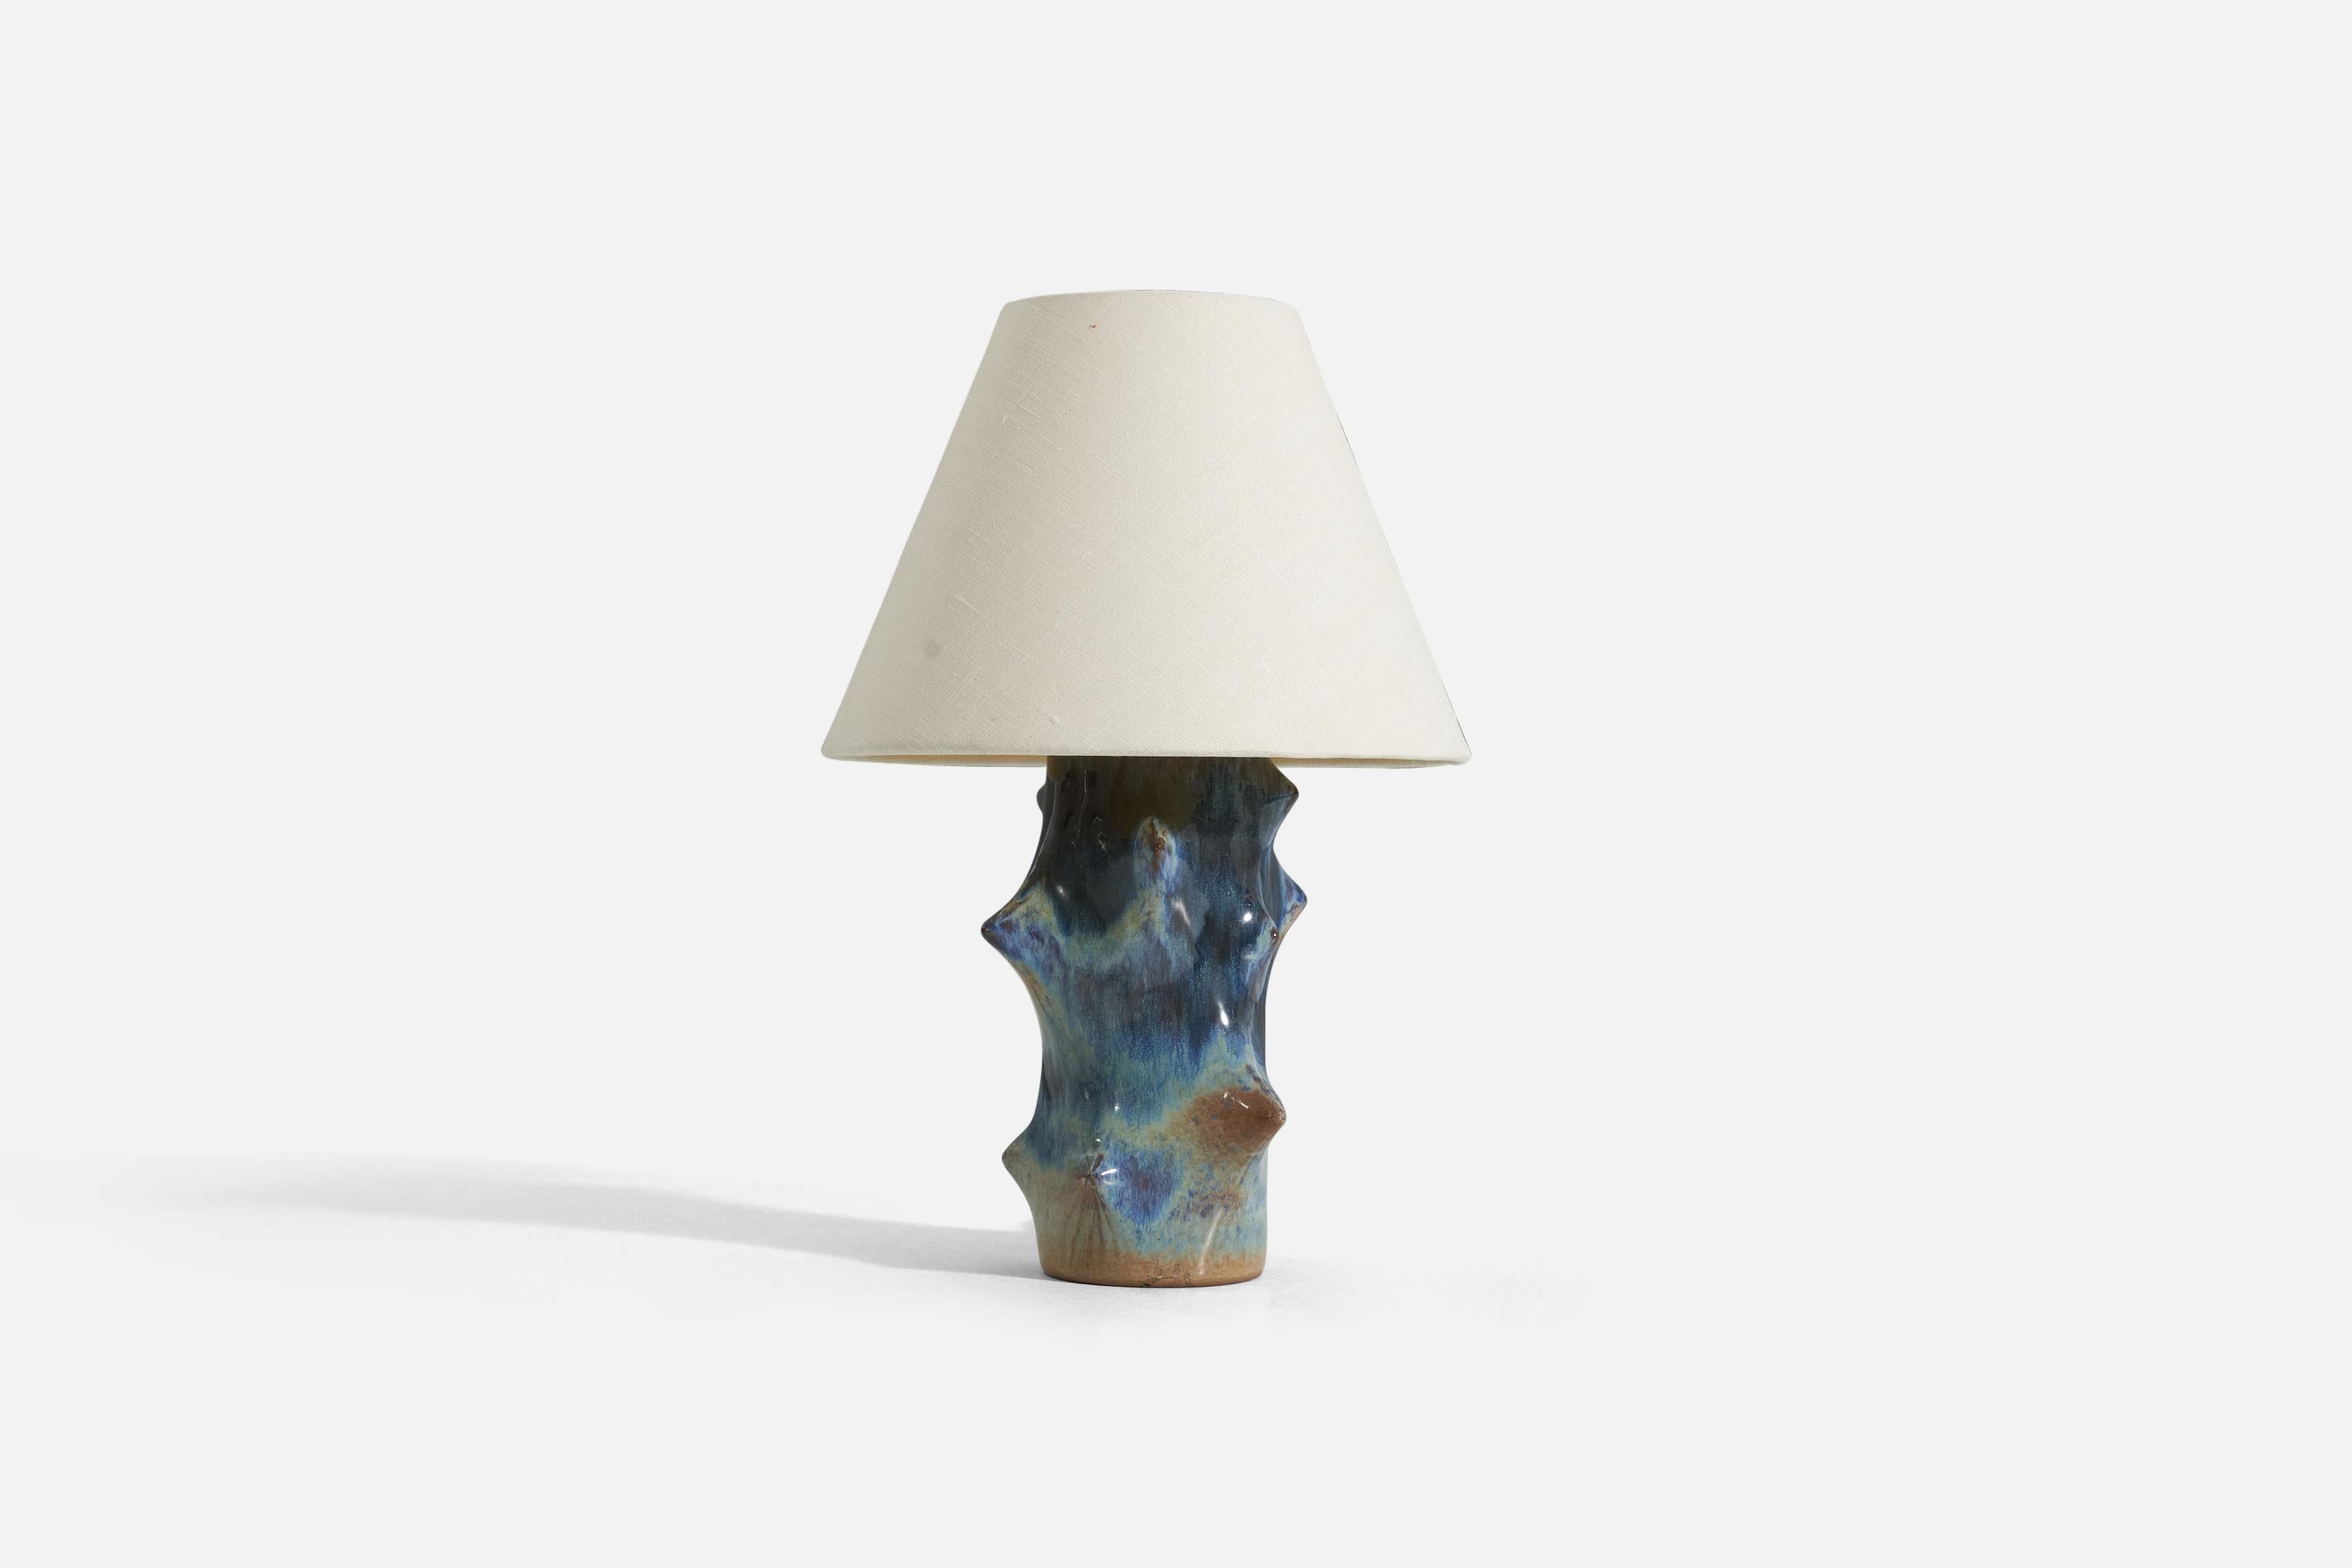 A blue and brown-glazed stoneware table lamp designed by Danish ceramicist Knud Basse, produced by Michael Andersen, Denmark in partnership with danish lamp manufacturer Lyfa. 

Measurements listed are of the lamp itself. Sold without